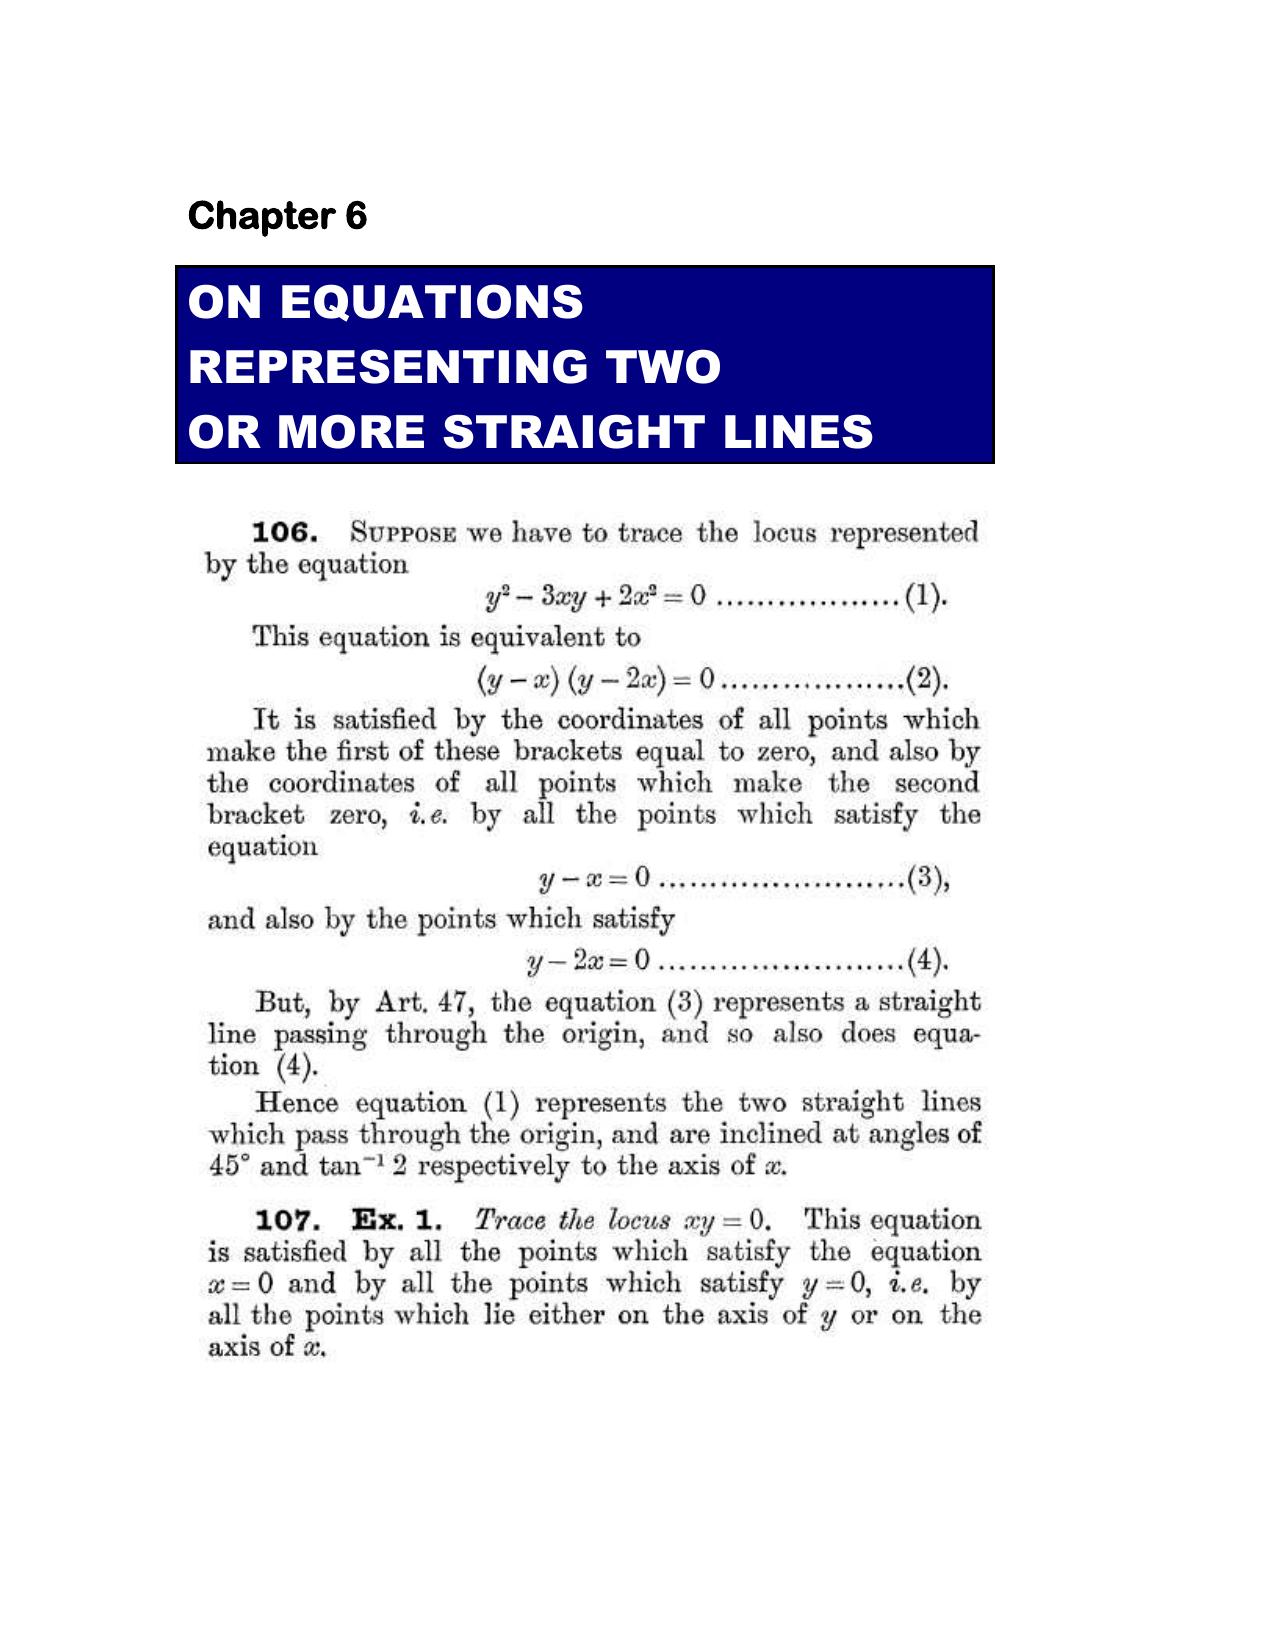 Chapter 6: On Equations Representing Two or More Straight Lines - SL Loney Solutions: The Elements of Coordinate Geometry - Page 1